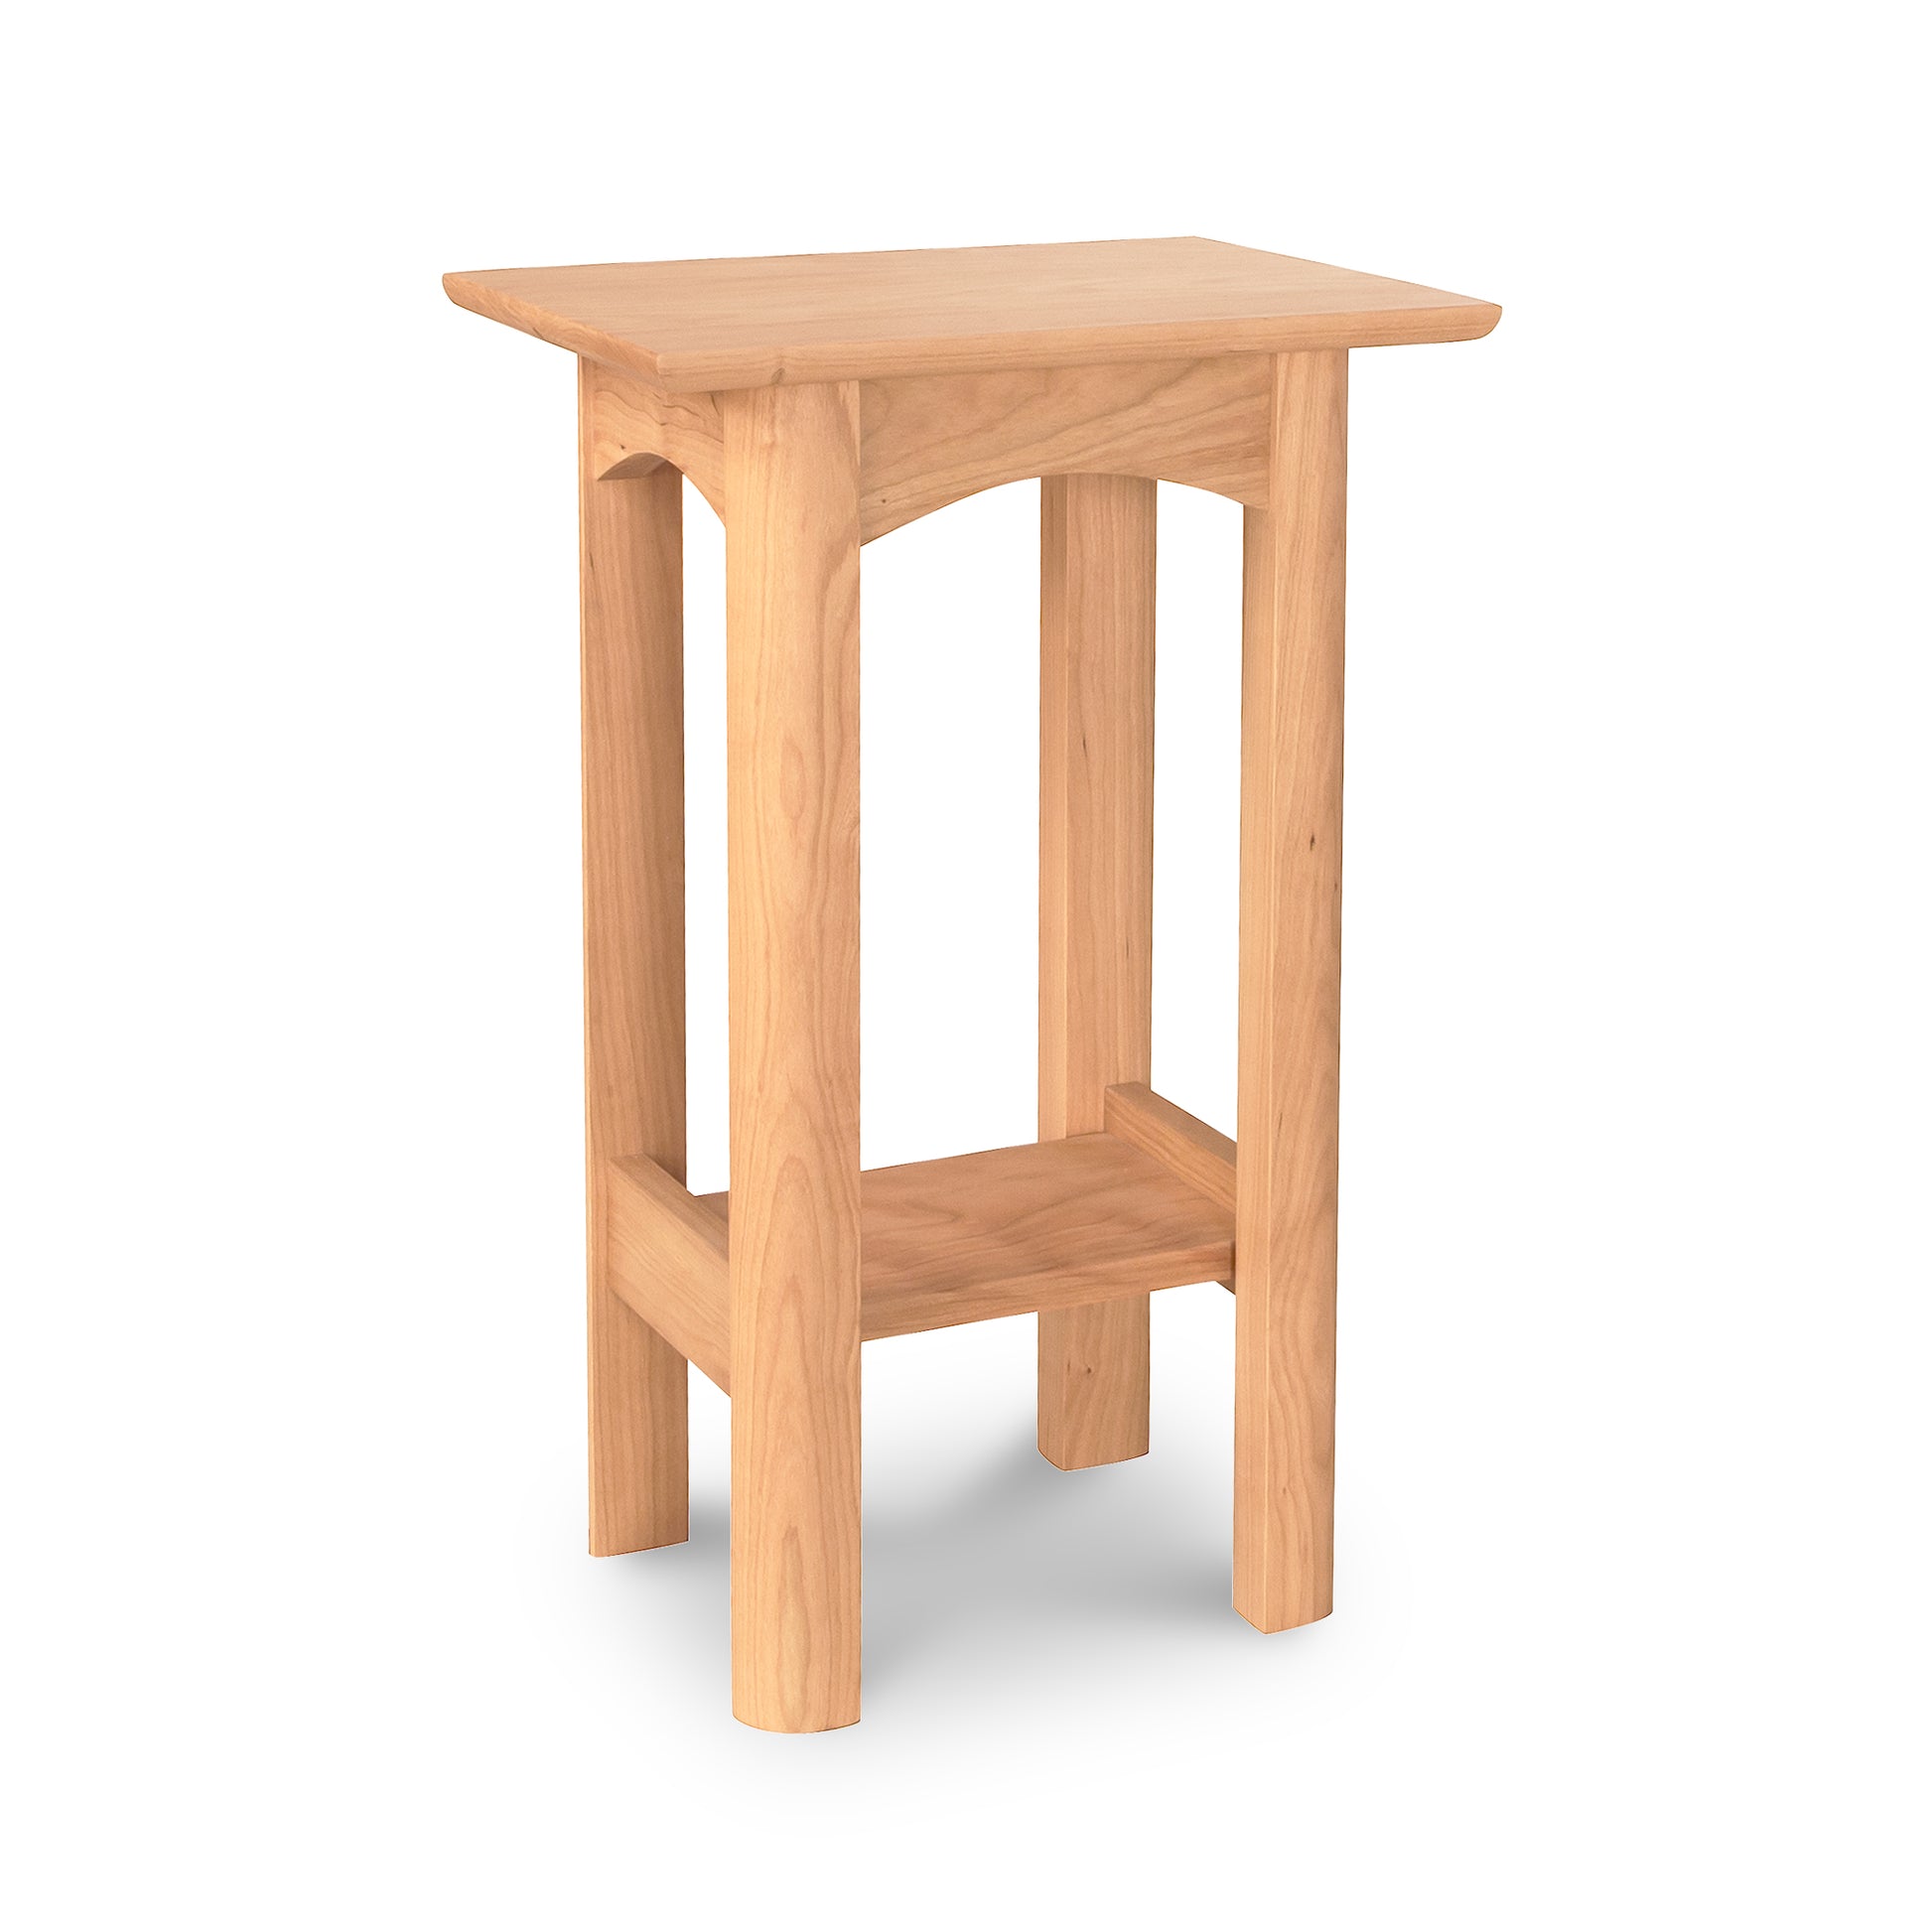 A solid wood Vermont Furniture Designs Heartwood Shaker End Table with a square top and a lower shelf, isolated on a white background.